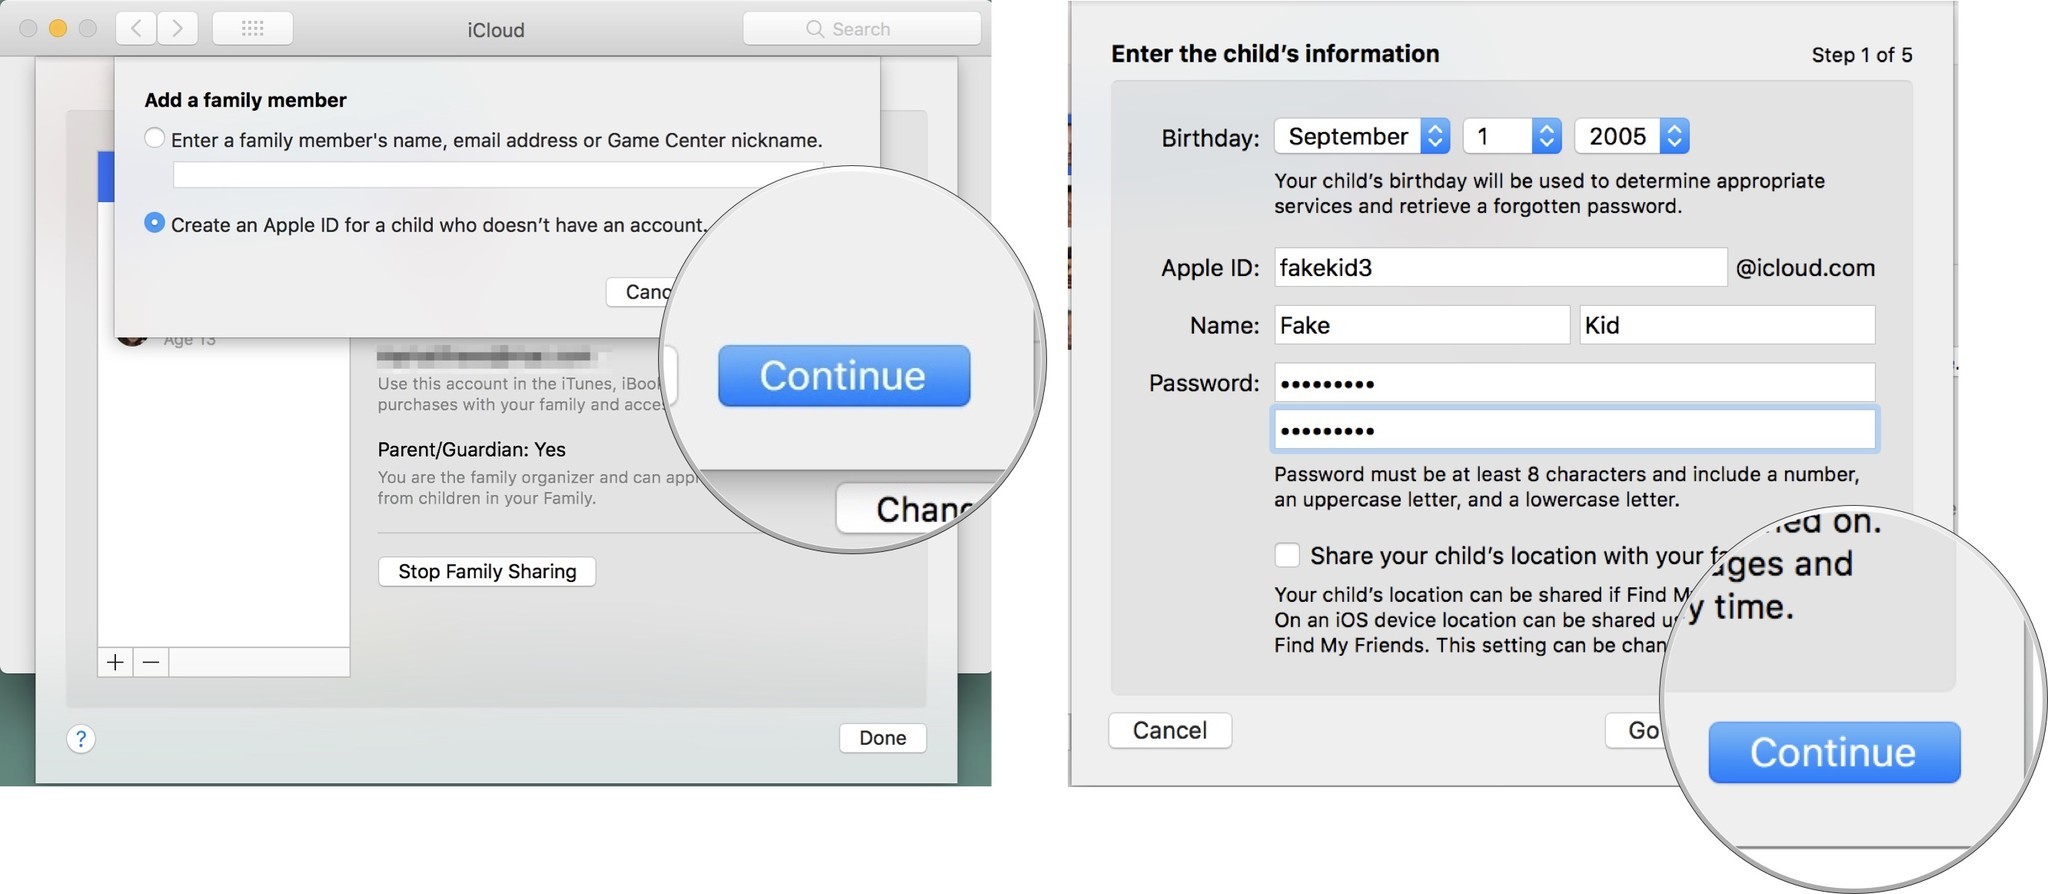 Add a child account: Click on Create an Apple ID, then click Continue, then enter the child's info, then click Continue